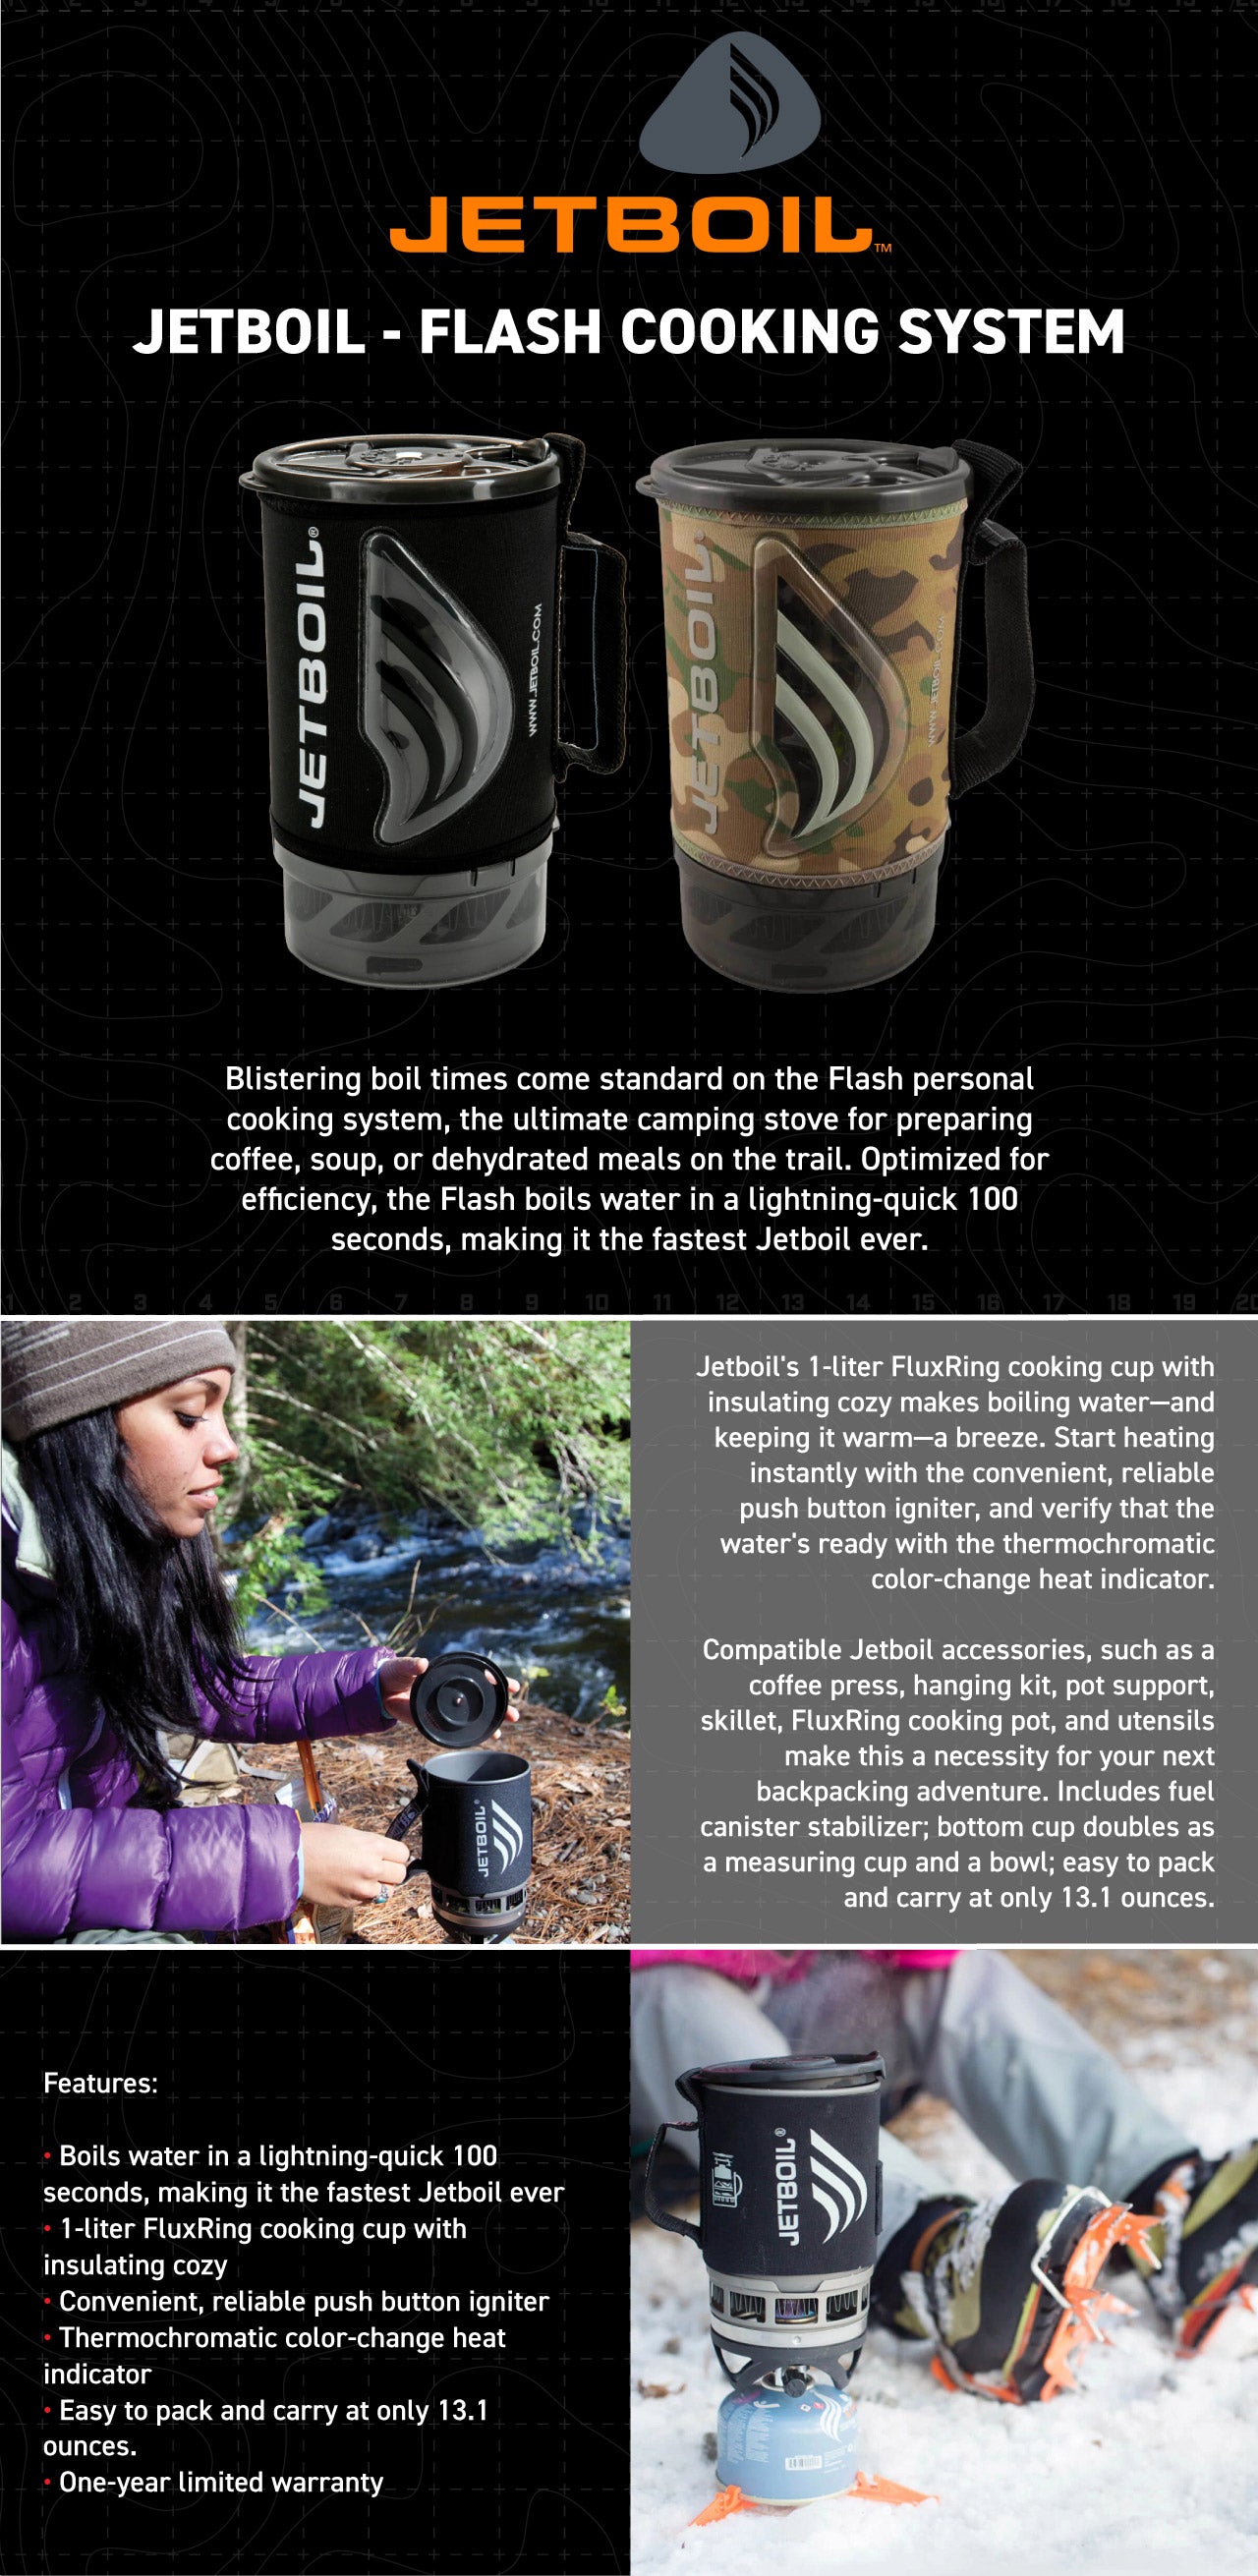 Blistering boil times come standard on the Flash personal cooking system, the ultimate camping stove for preparing coffee, soup, or dehydrated meals on the trail. Optimized for efficiency, the Flash boils water in a lightning-quick 100 seconds, making it the fastest Jetboil ever.